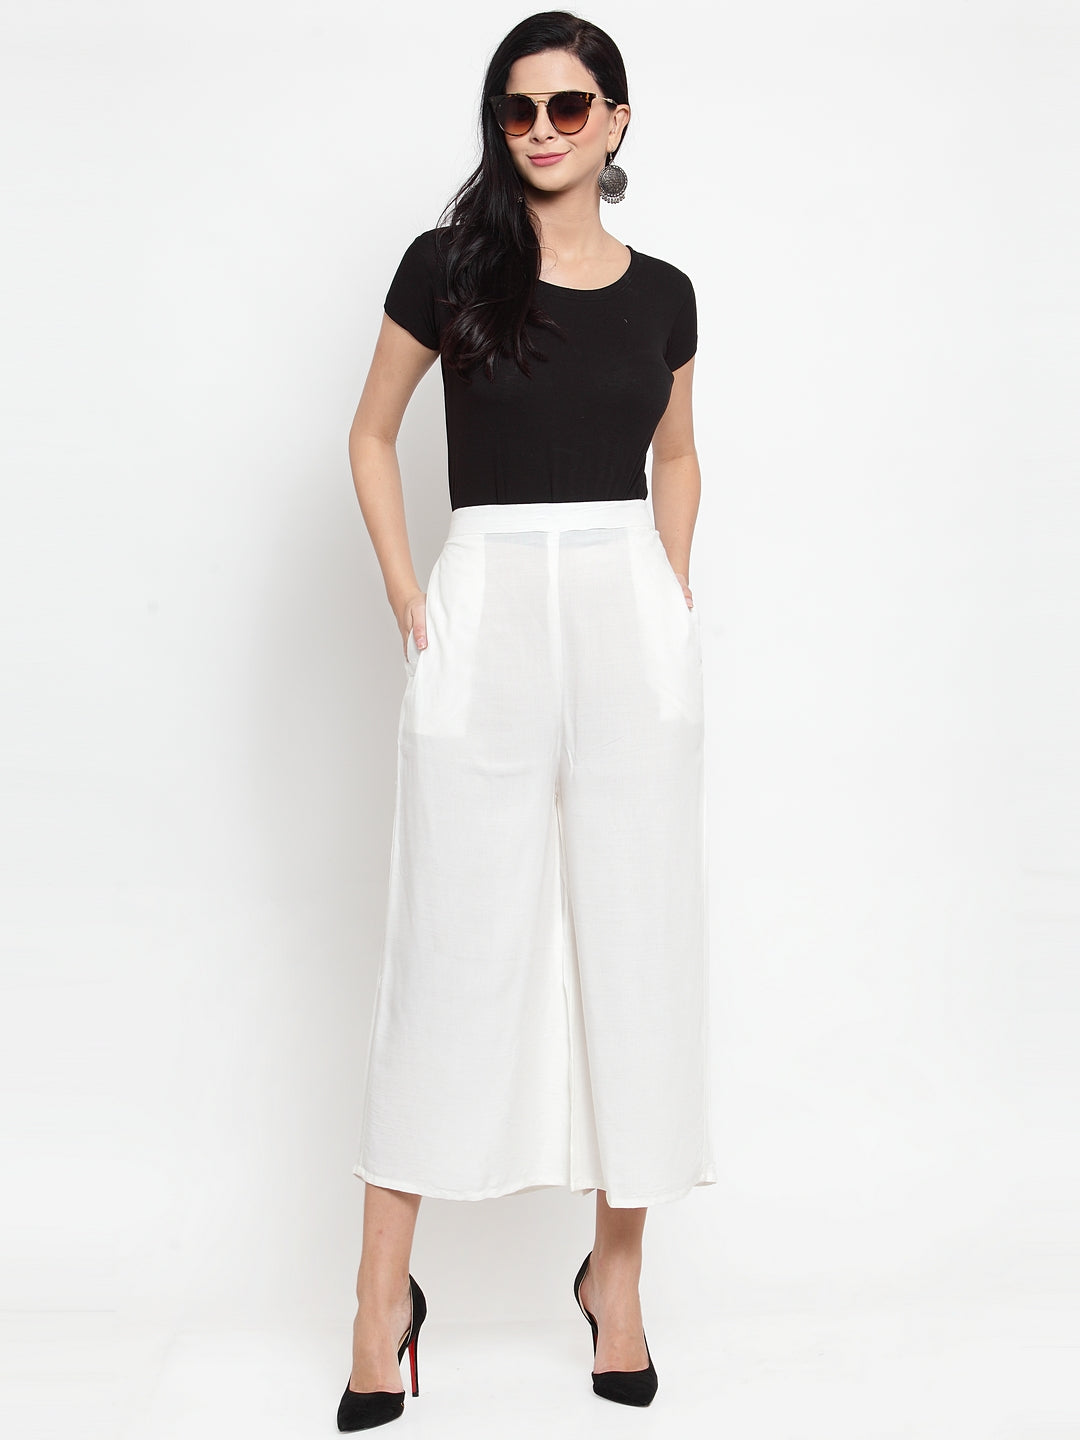 Women's Off-White Solid Rayon Culottes - Wahe-NOOR